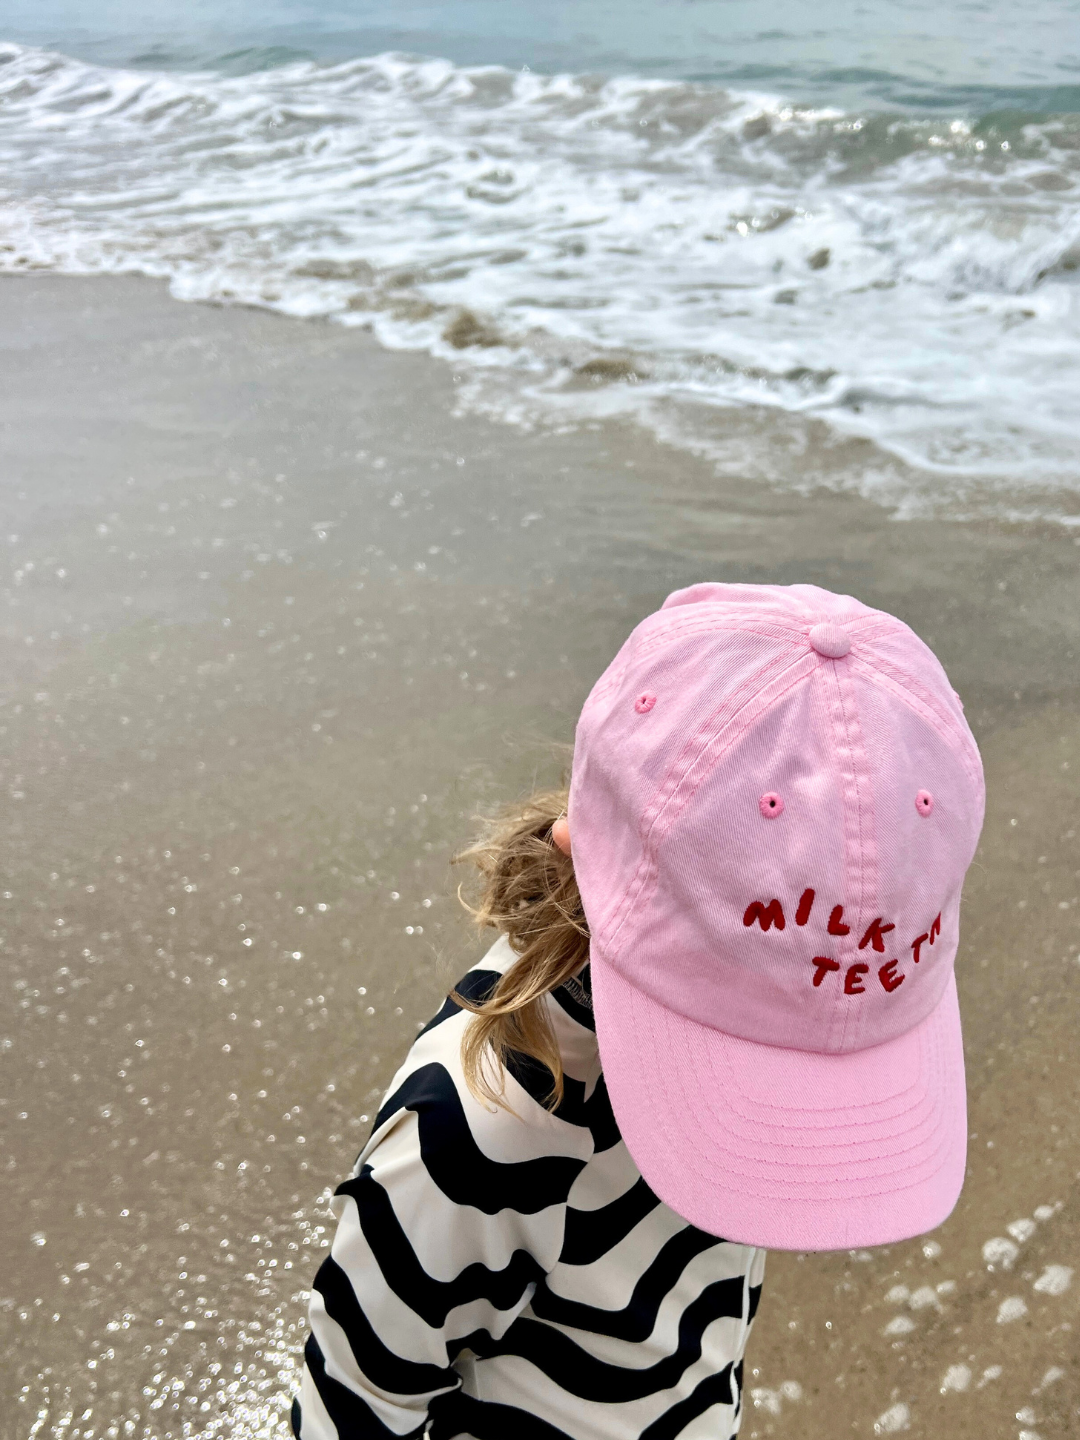 Child wearing the Milk Teeth baseball cap in bubblegum pink with red Milk Teeth lettering, at the beach in a black and white striped swimsuit.